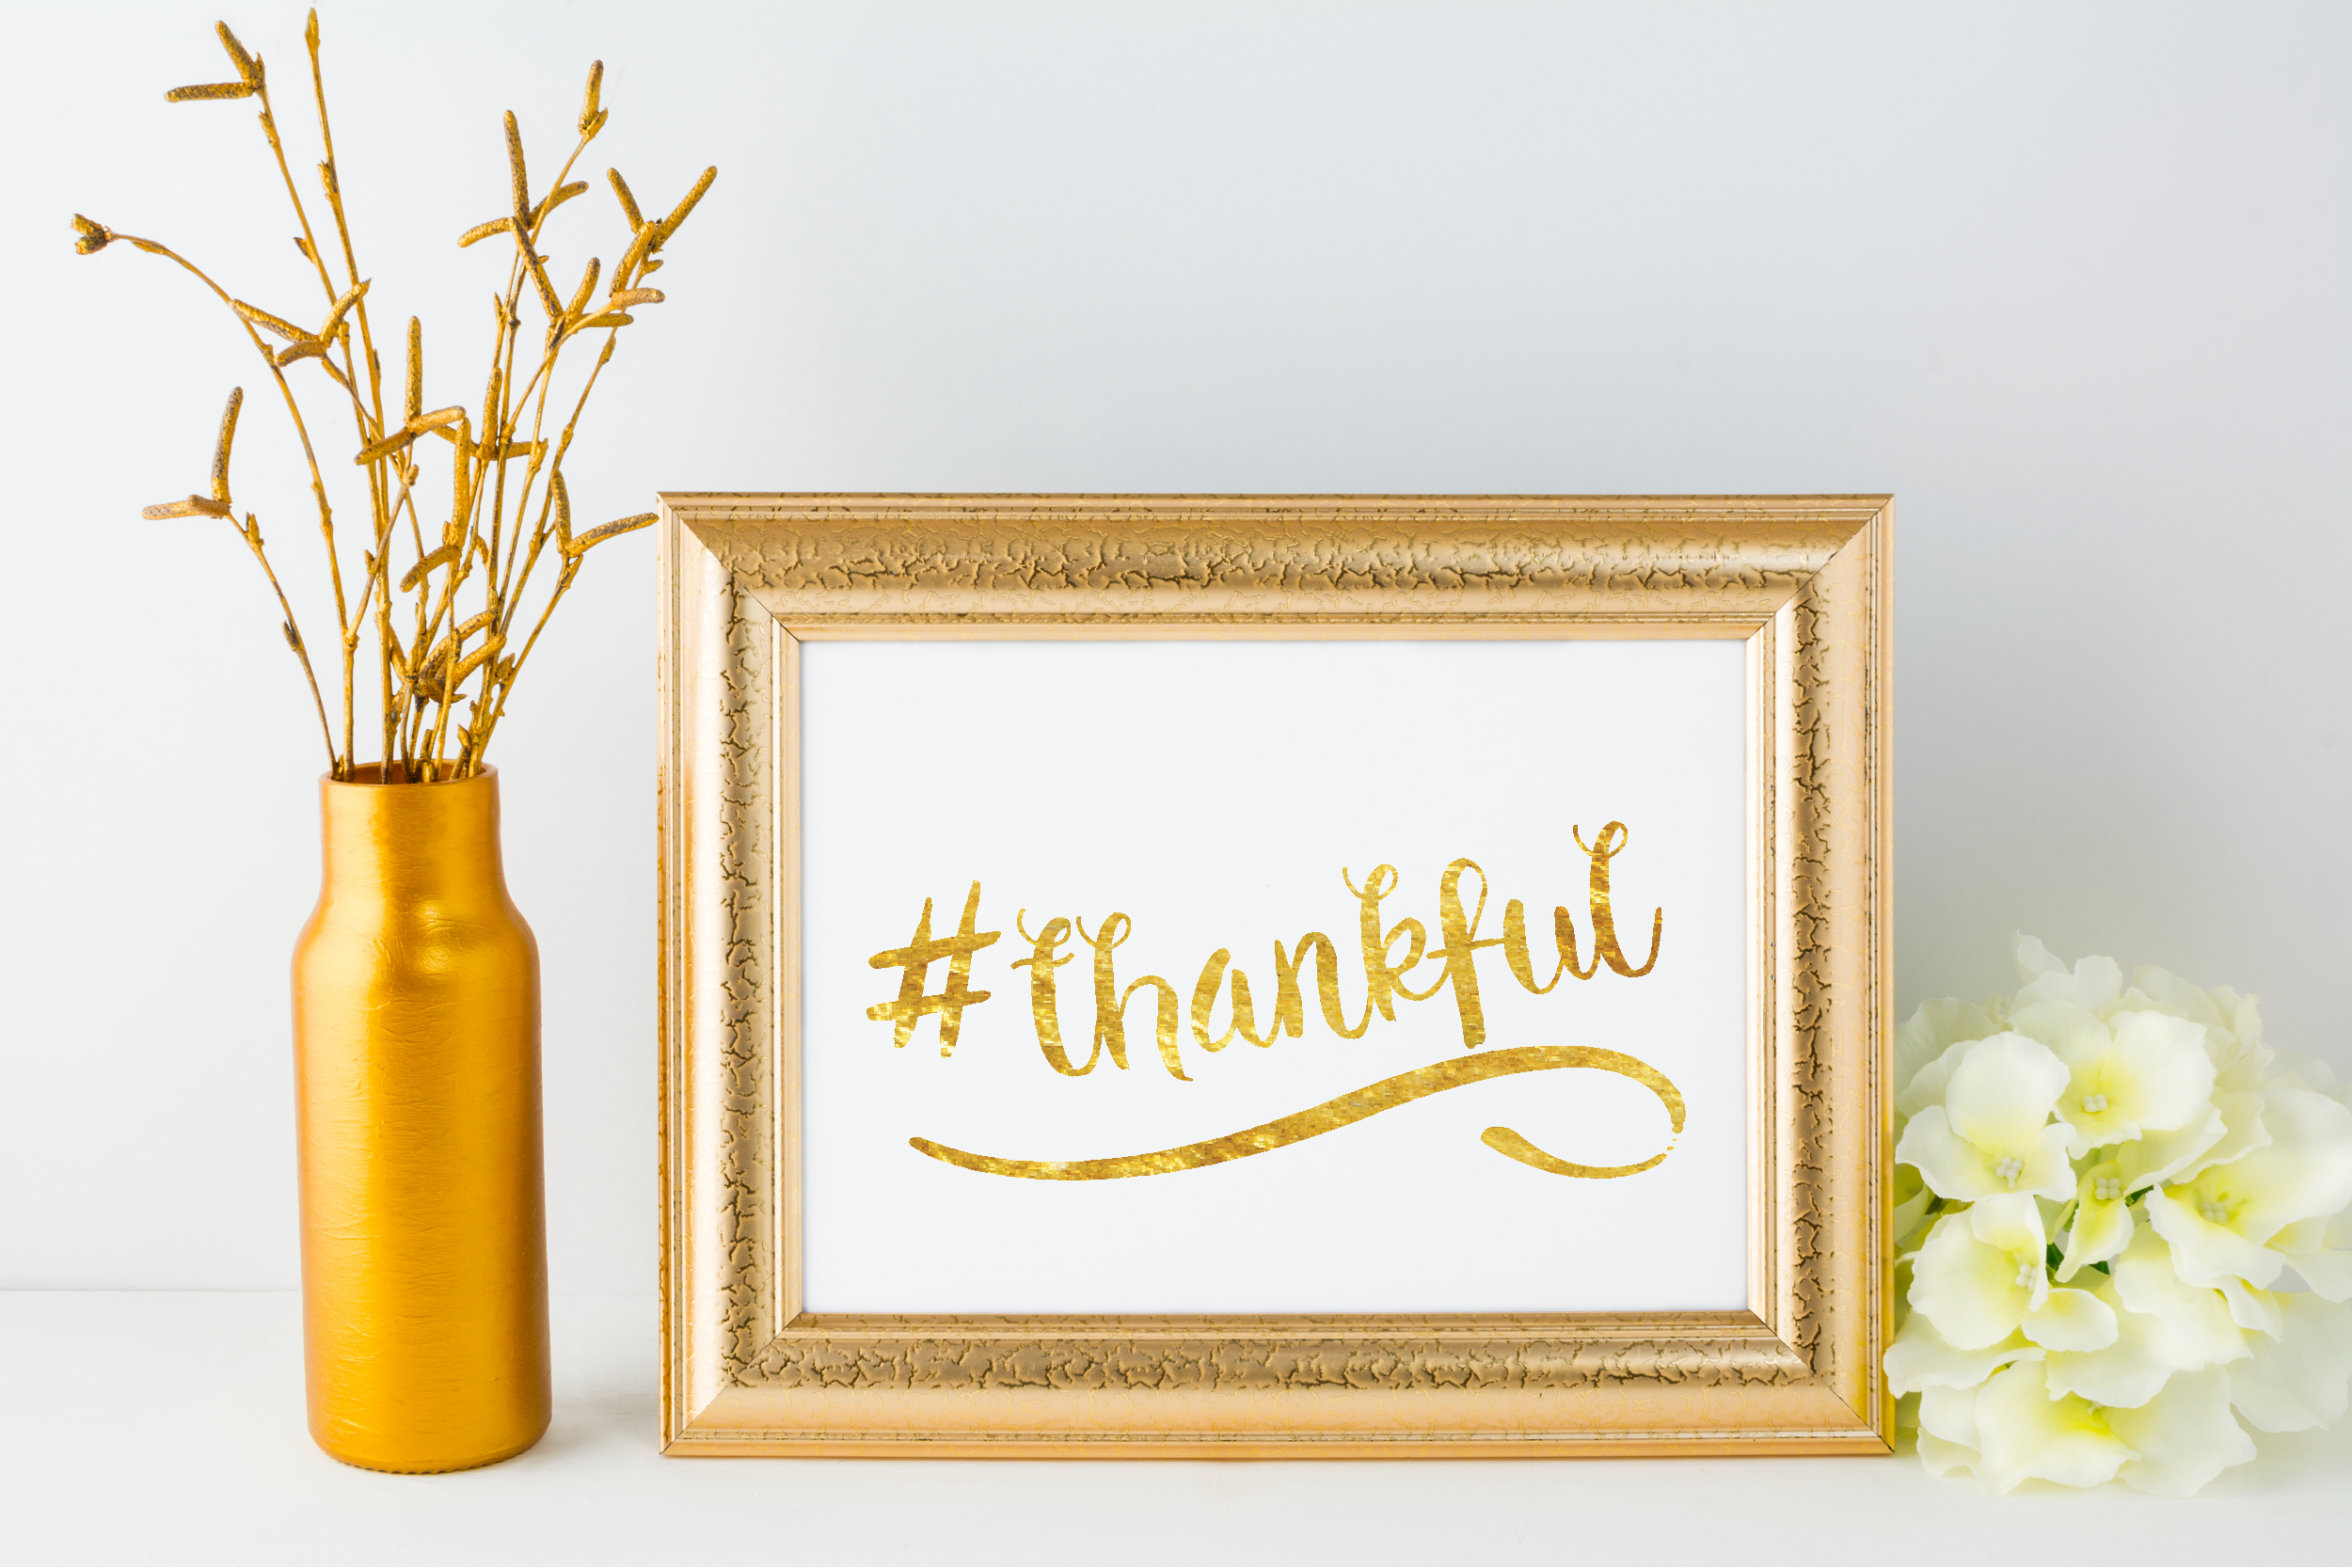 Free Printable hashtag Thankful in gold from @pinkimonogirl for a gallery wall